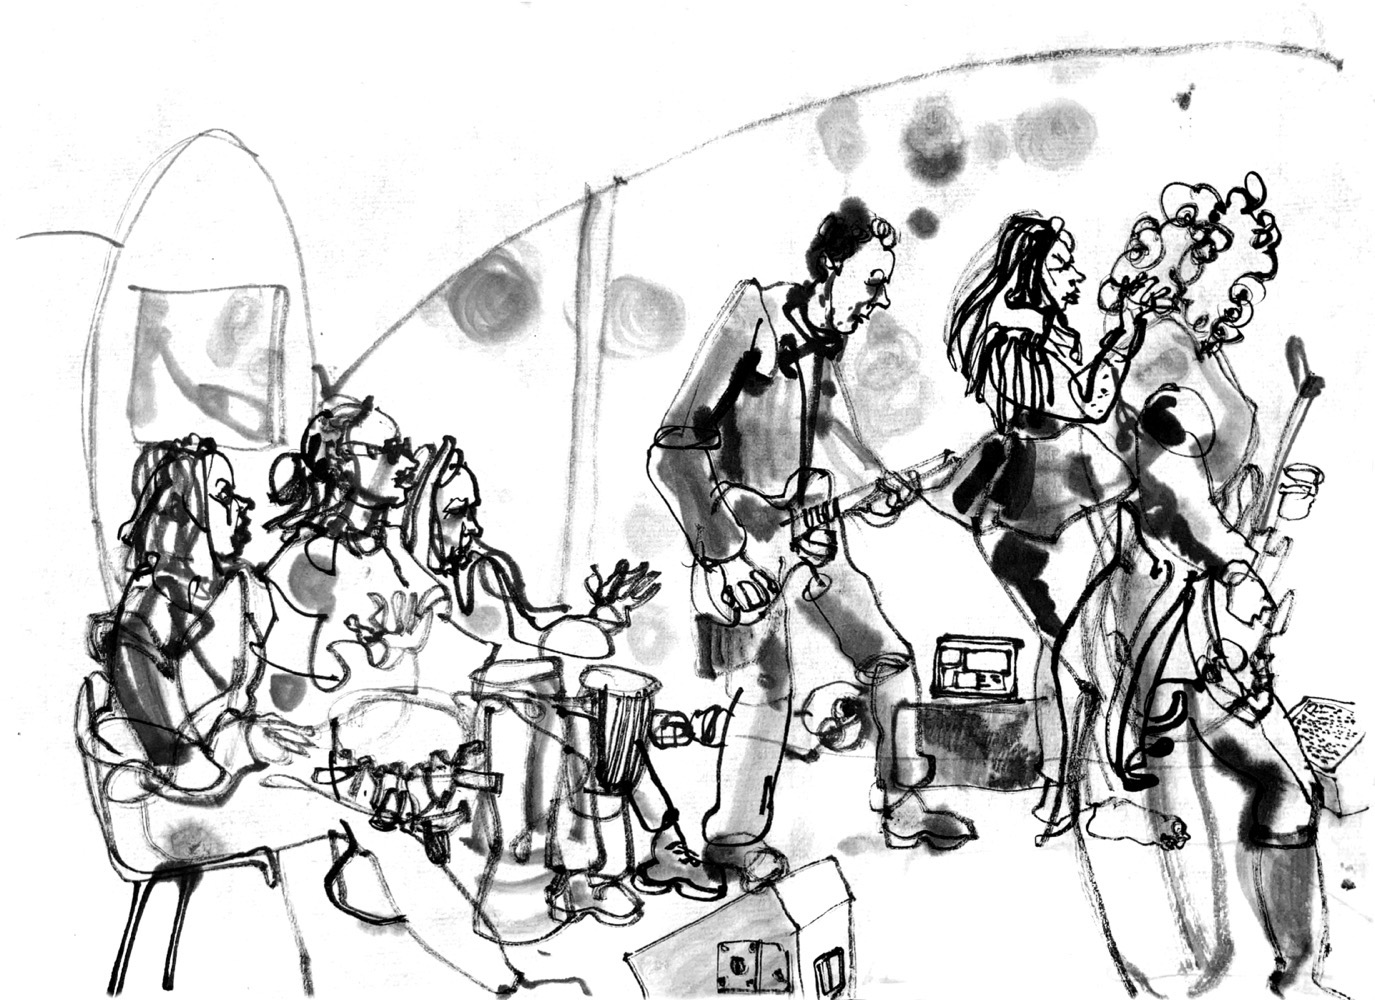 Ink drawing of 6 musicians.